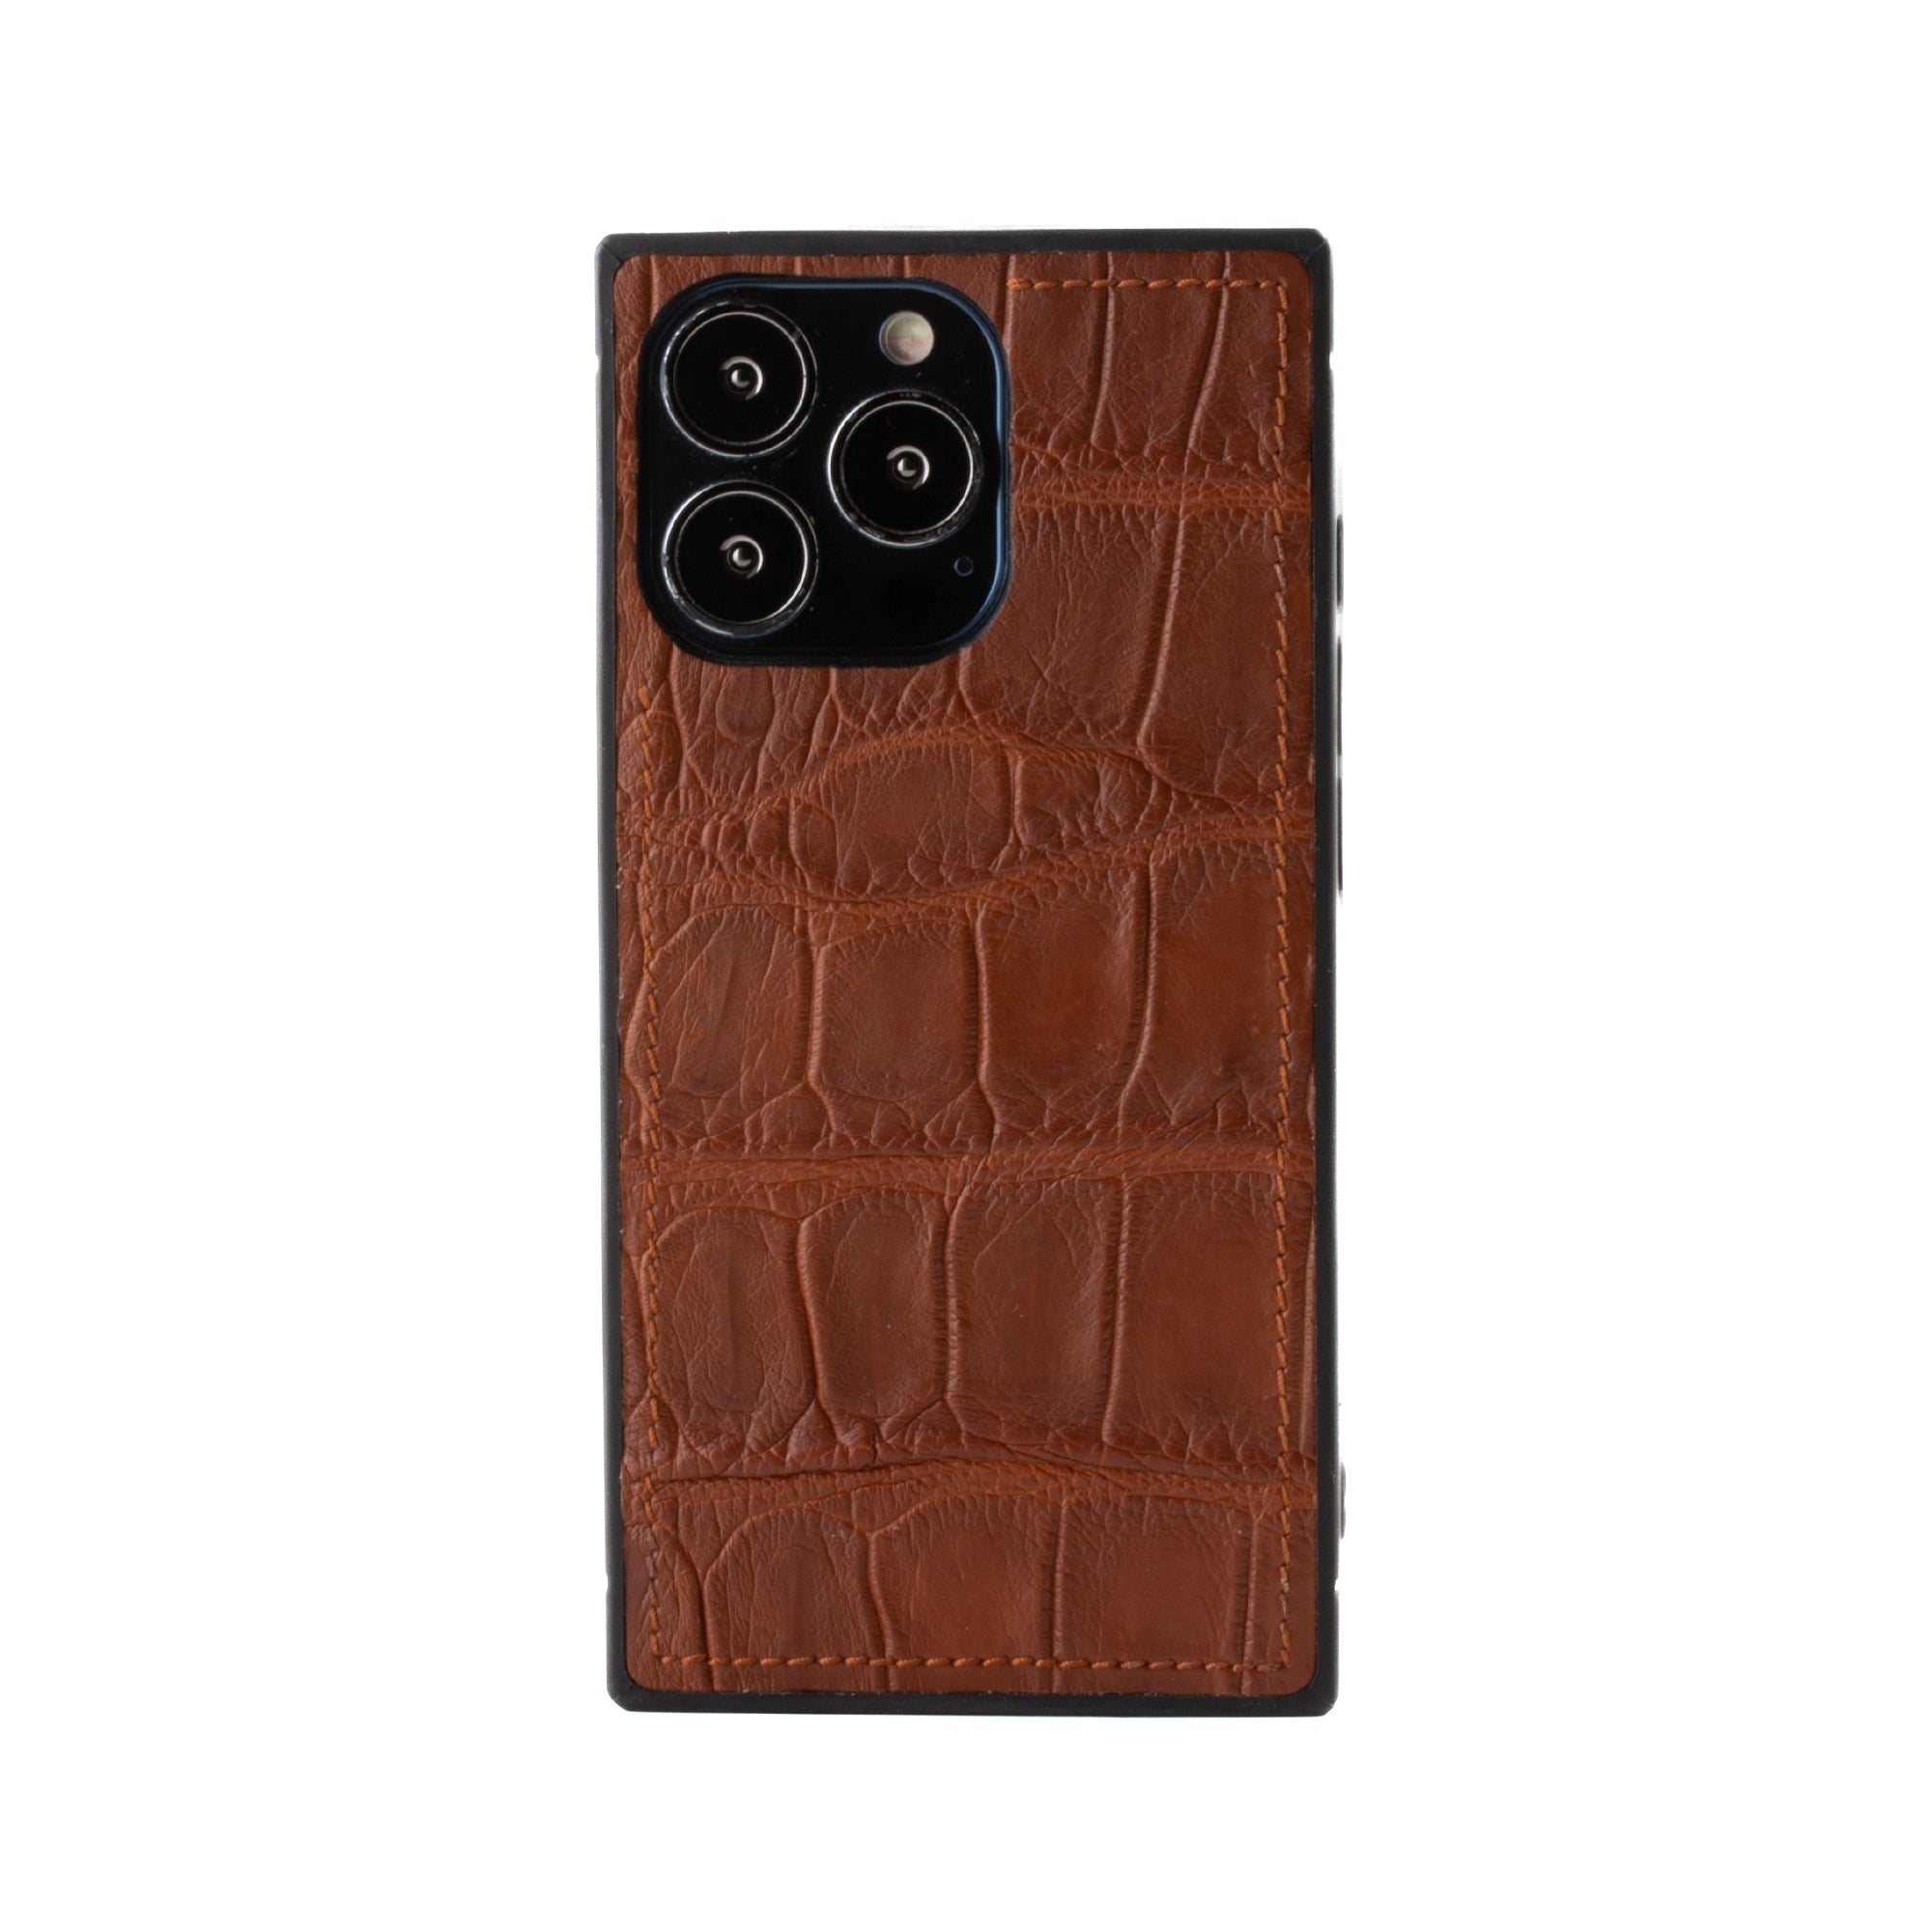 Clearance Sale - Leather iPhone "Square Case" - iPhone 13 Pro - Brown alligator